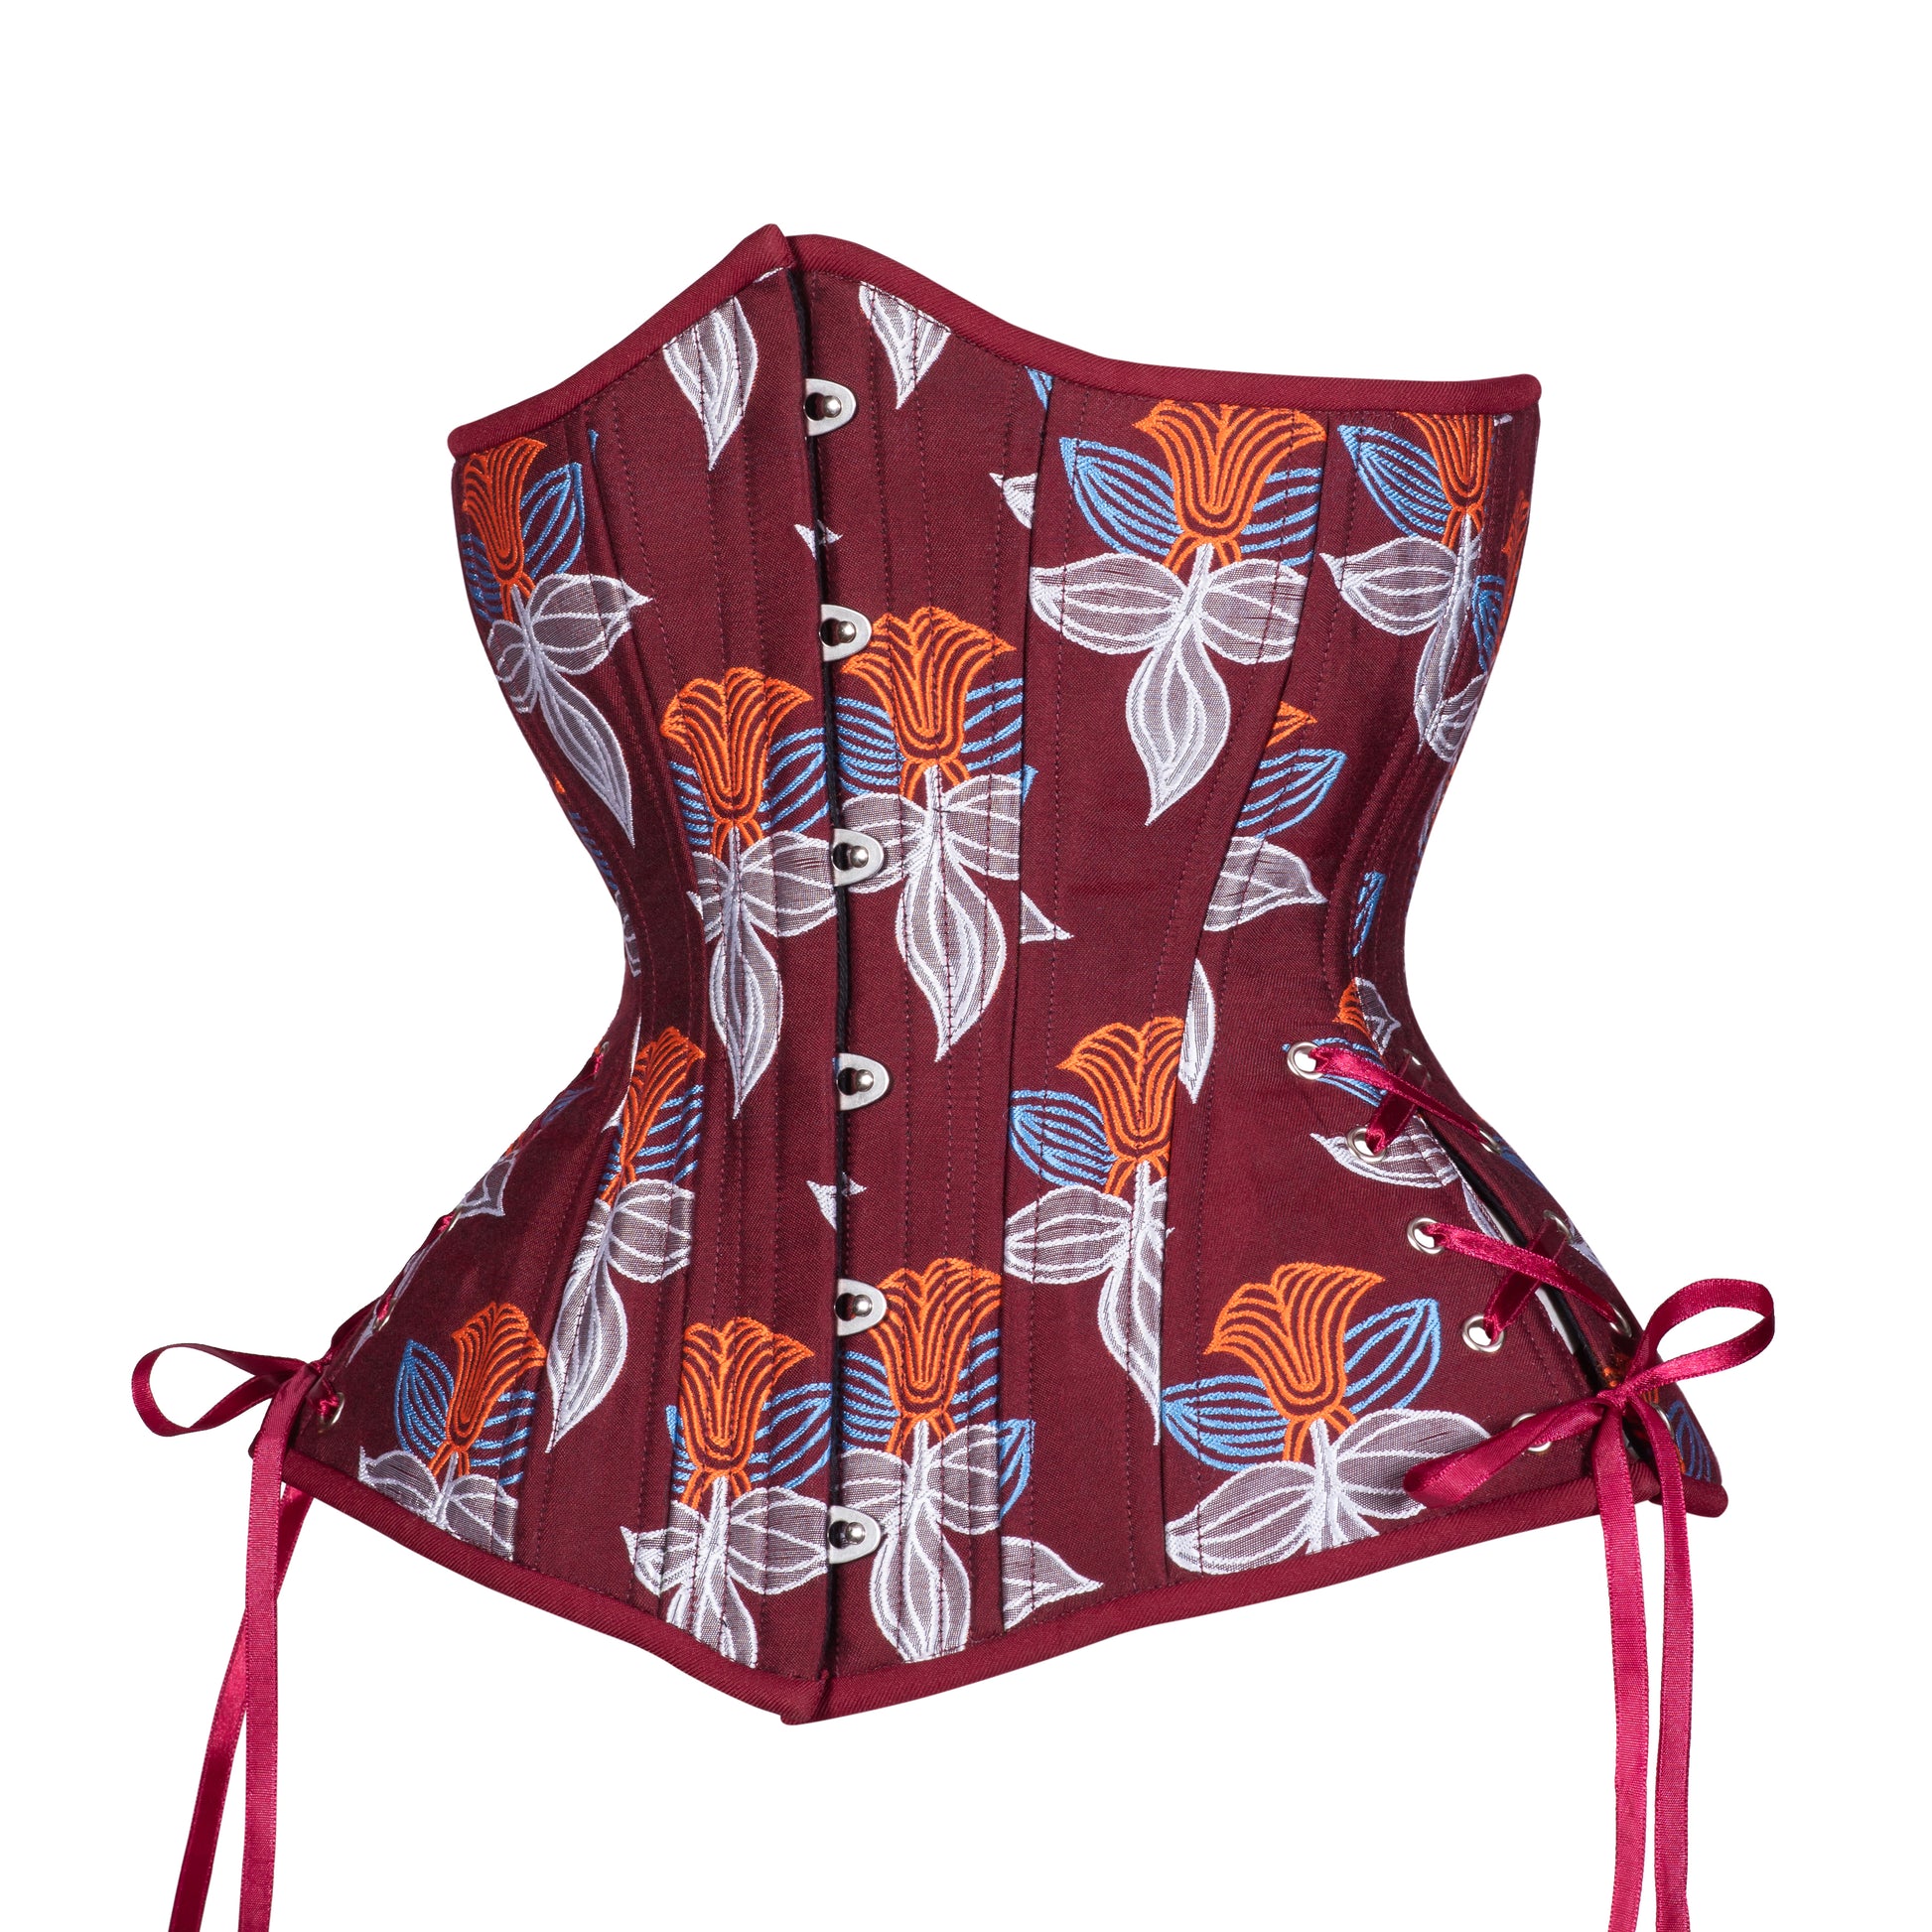 Burgundy with Flowers Corset, Hourglass Silhouette, Long – Timeless Trends